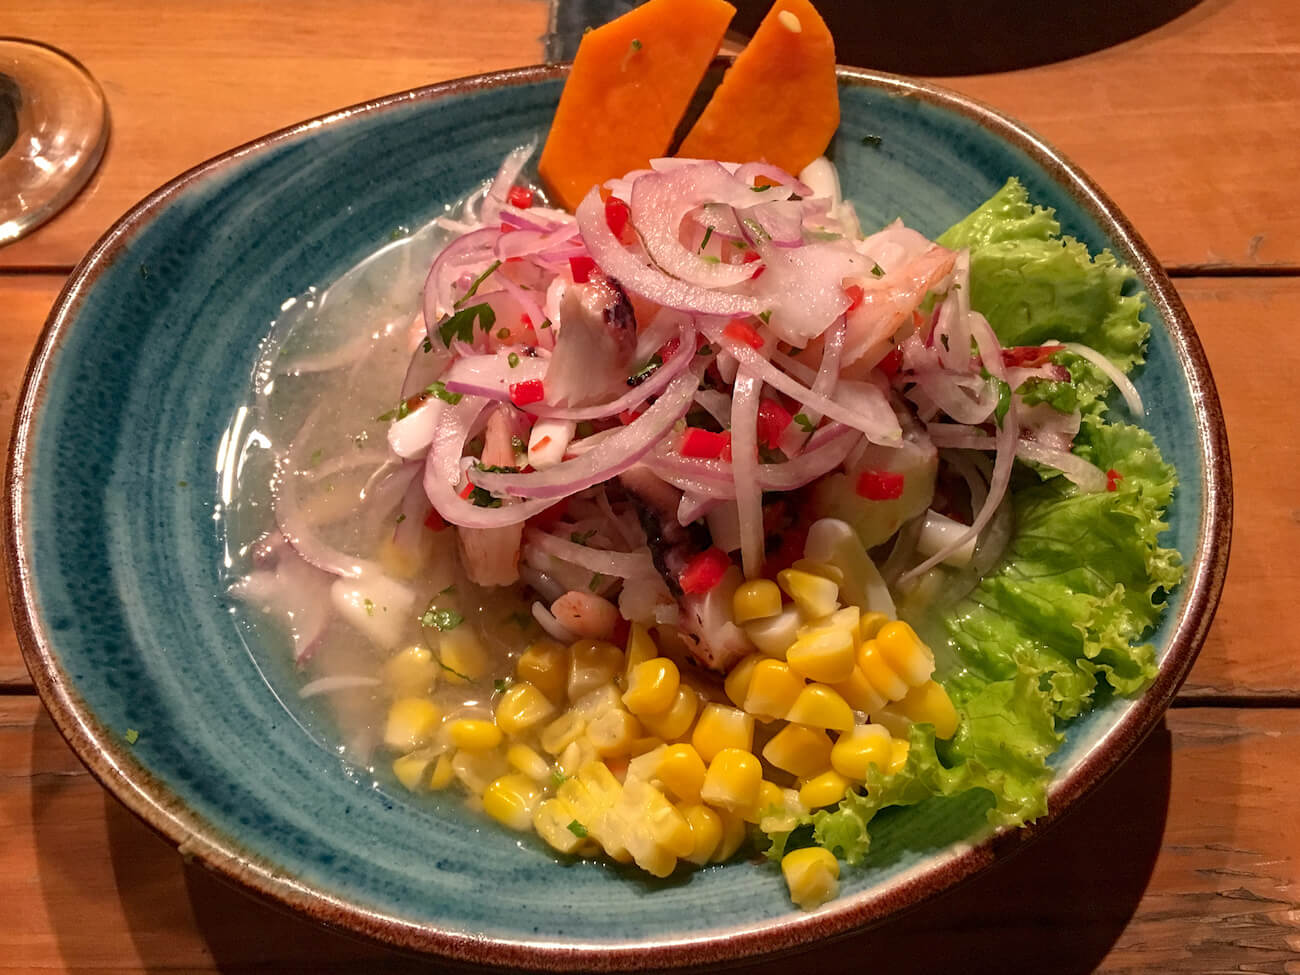 Ceviche from Chiclayo restaurant in Medellin